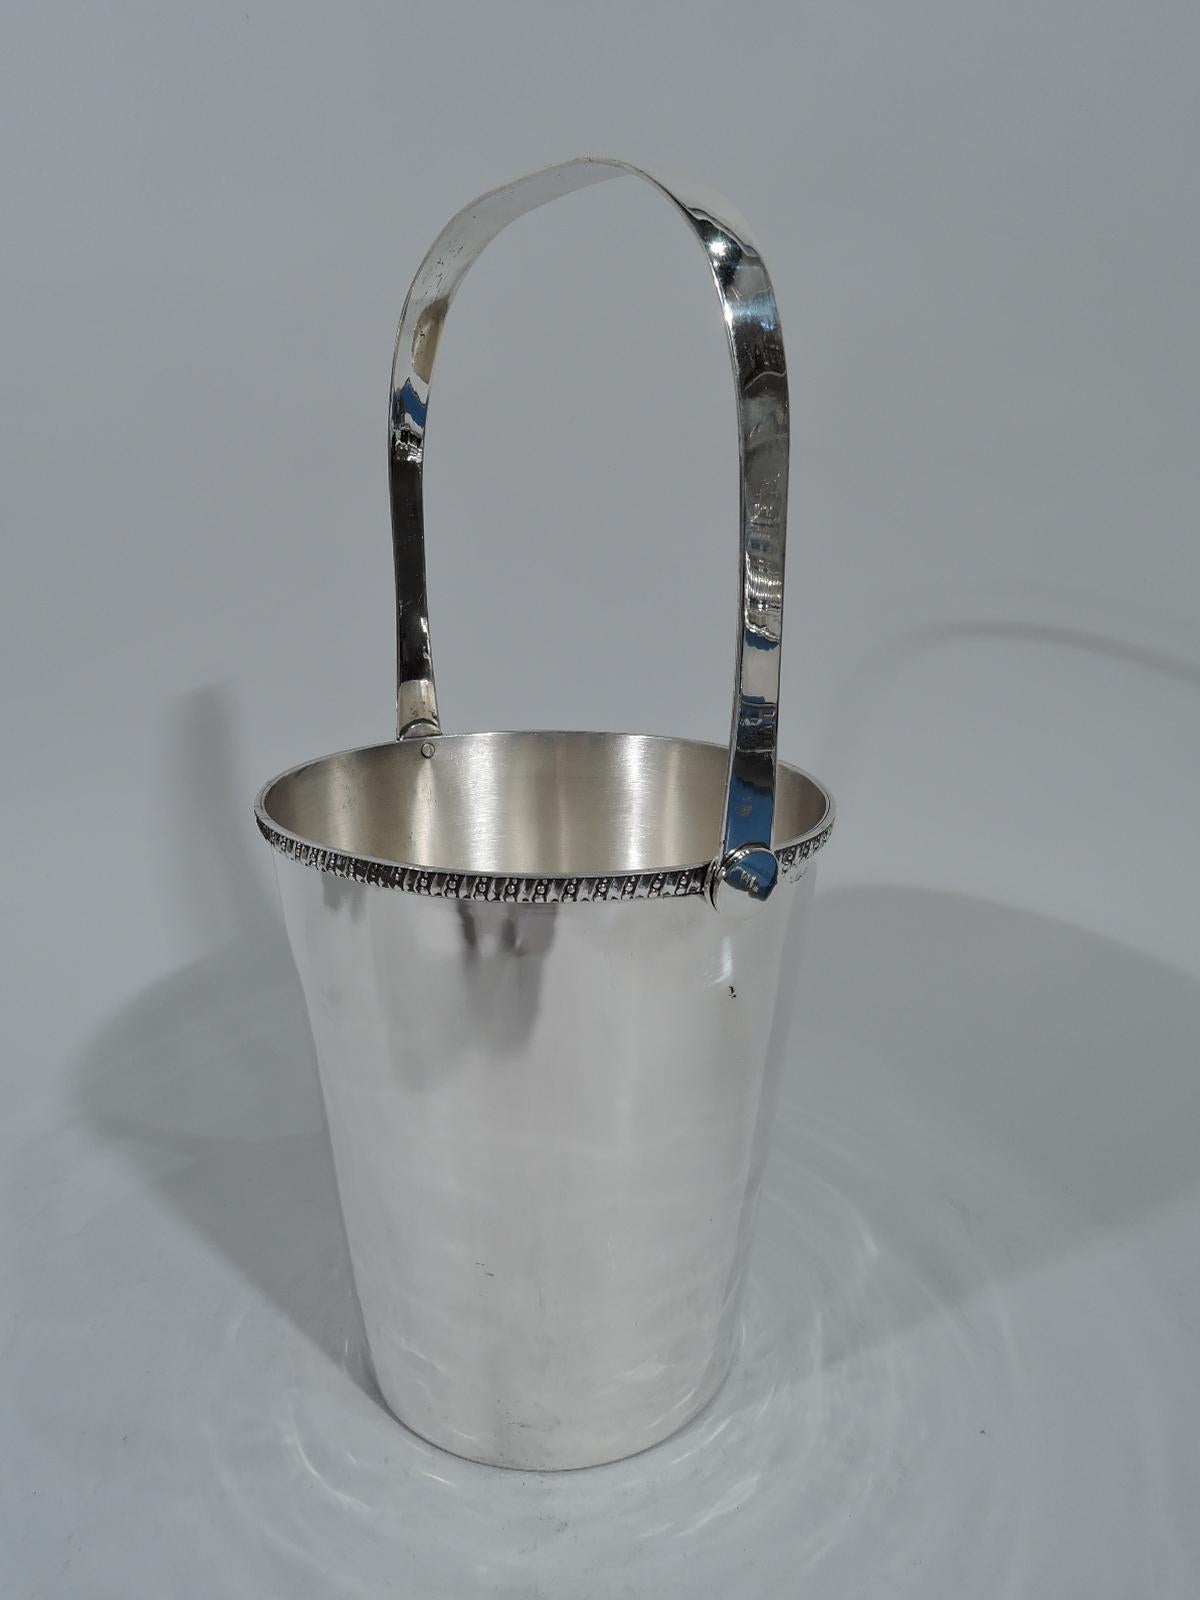 Modern Japanese 950 silver ice bucket. Straight and tapering sides and swing u-form handle. Rim has alternating flutes and beading. Hallmarked “Silver Sterling 950”.

Dimensions: H (without handle) 6 1/4 x D 5 1/2 in. H (with handle) 12 in.